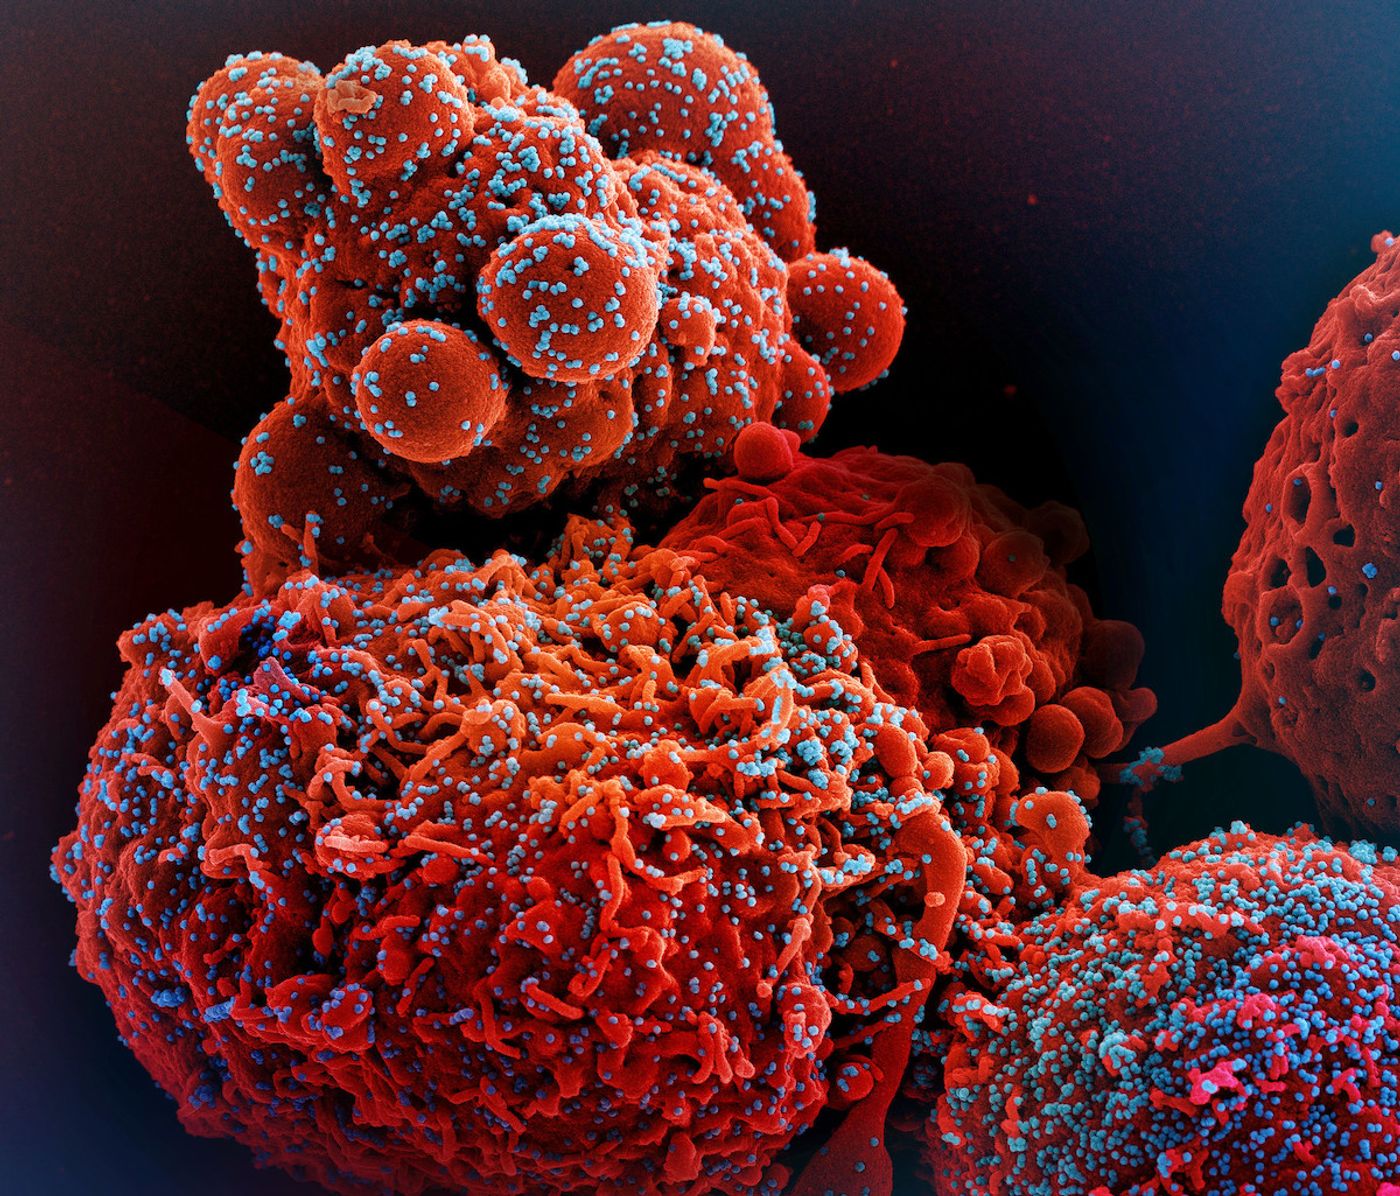 Colorized scanning electron micrograph of a cell (red) infected with the Omicron strain of SARS-CoV-2 virus particles (blue), isolated from a patient sample. Image captured at the NIAID Integrated Research Facility (IRF) in Fort Detrick, Maryland. Credit: NIAID